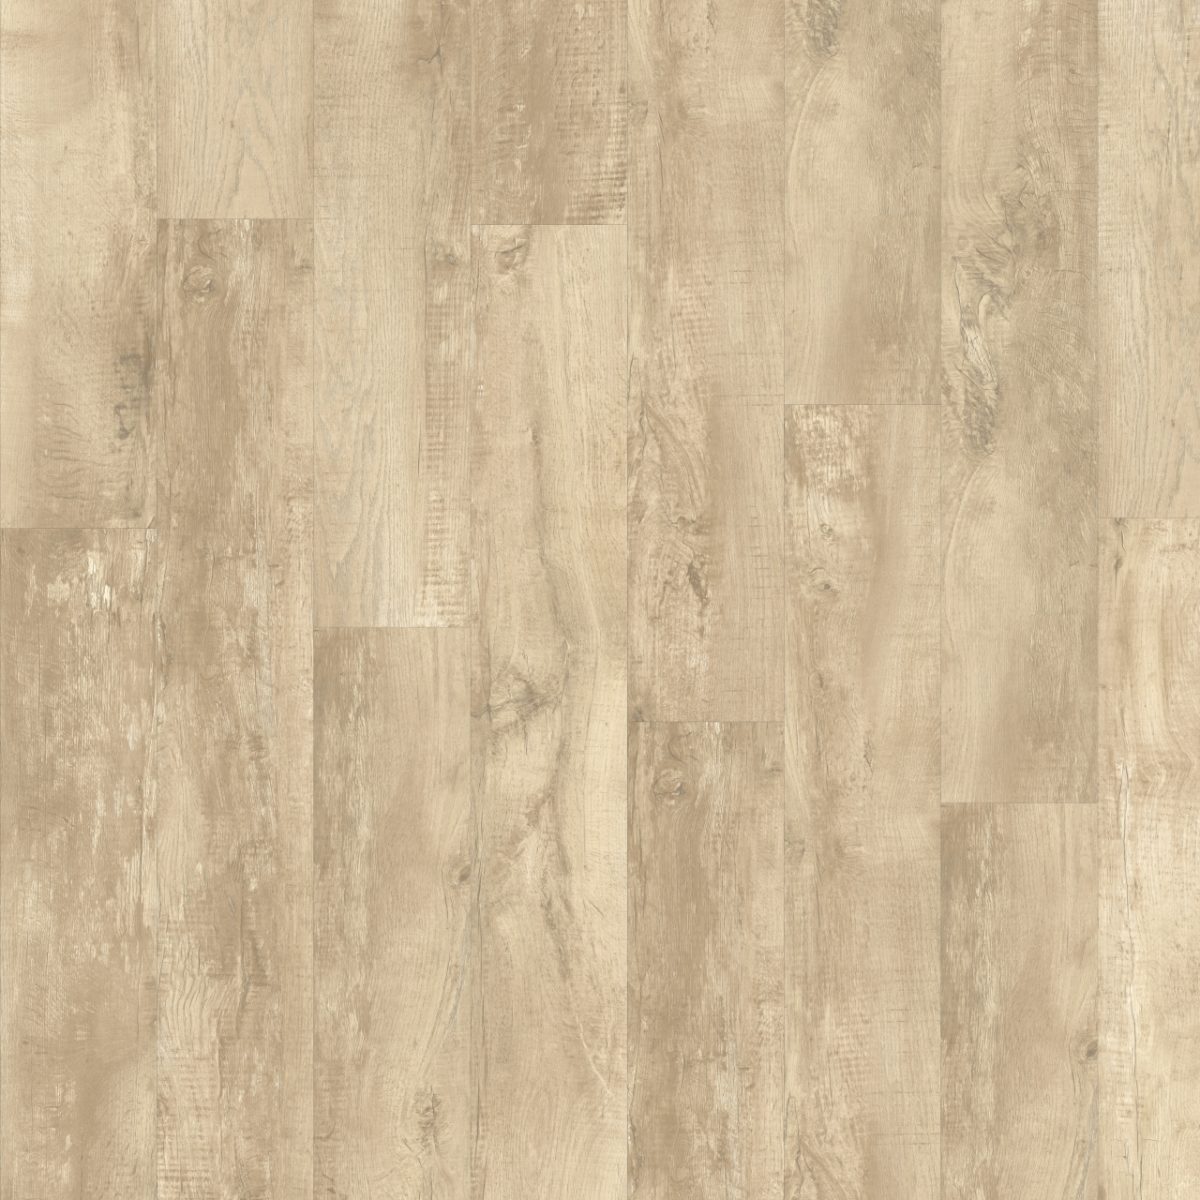 Moduleo Roots EIR Country Oak 54225